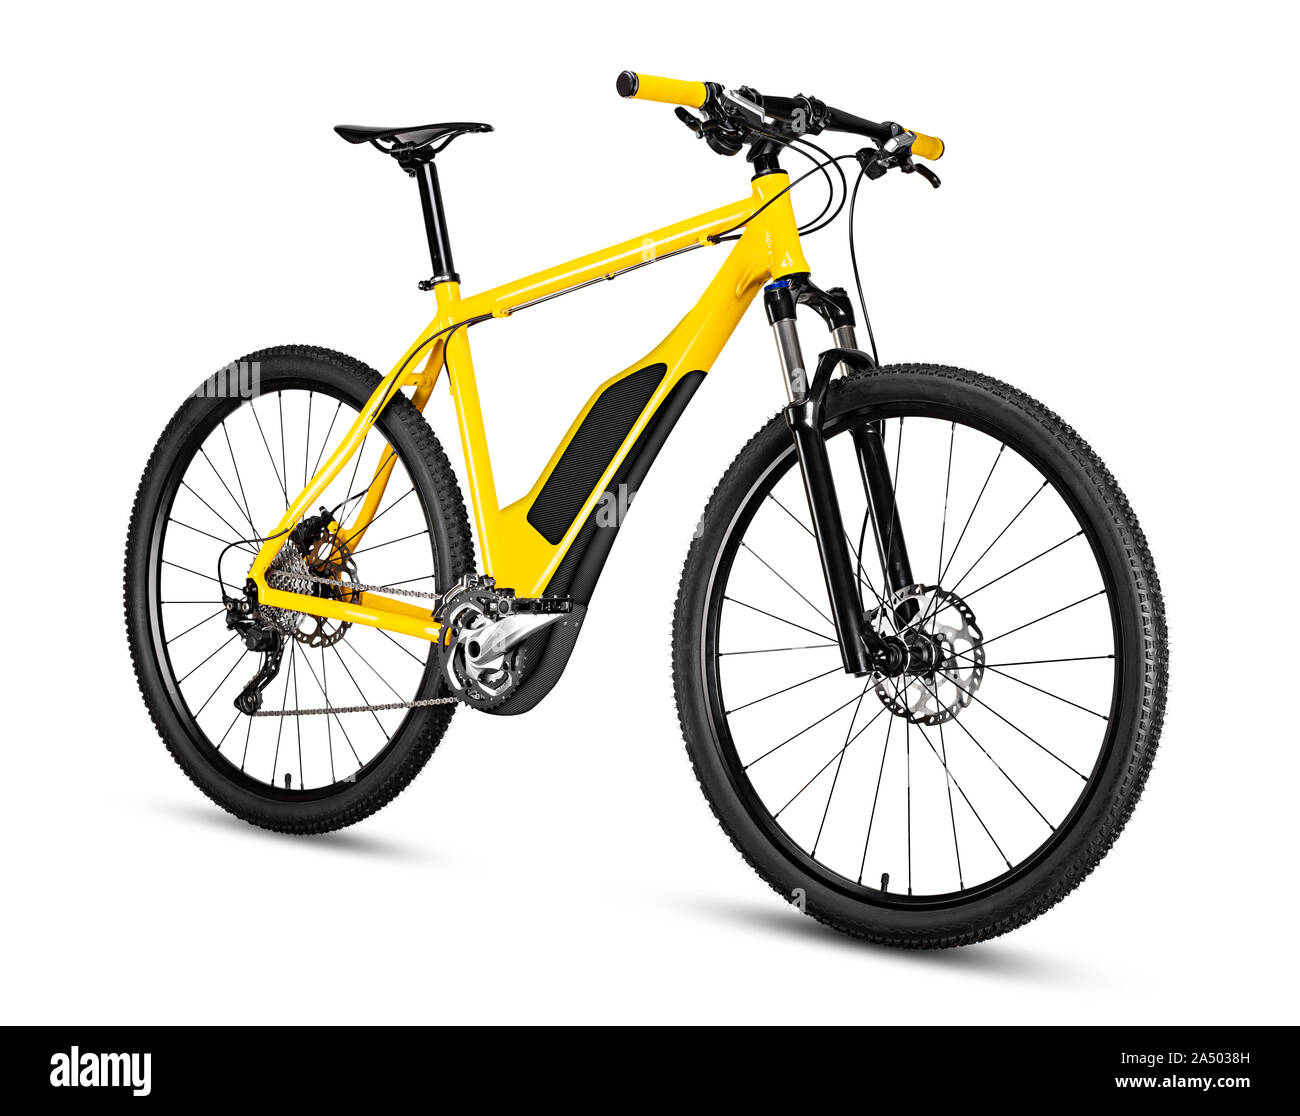 fantasy fictitious design of an yellow ebike pedelec with battery powered motor bicycle moutainbike. mountain bike ecology modern transport concept is Stock Photo